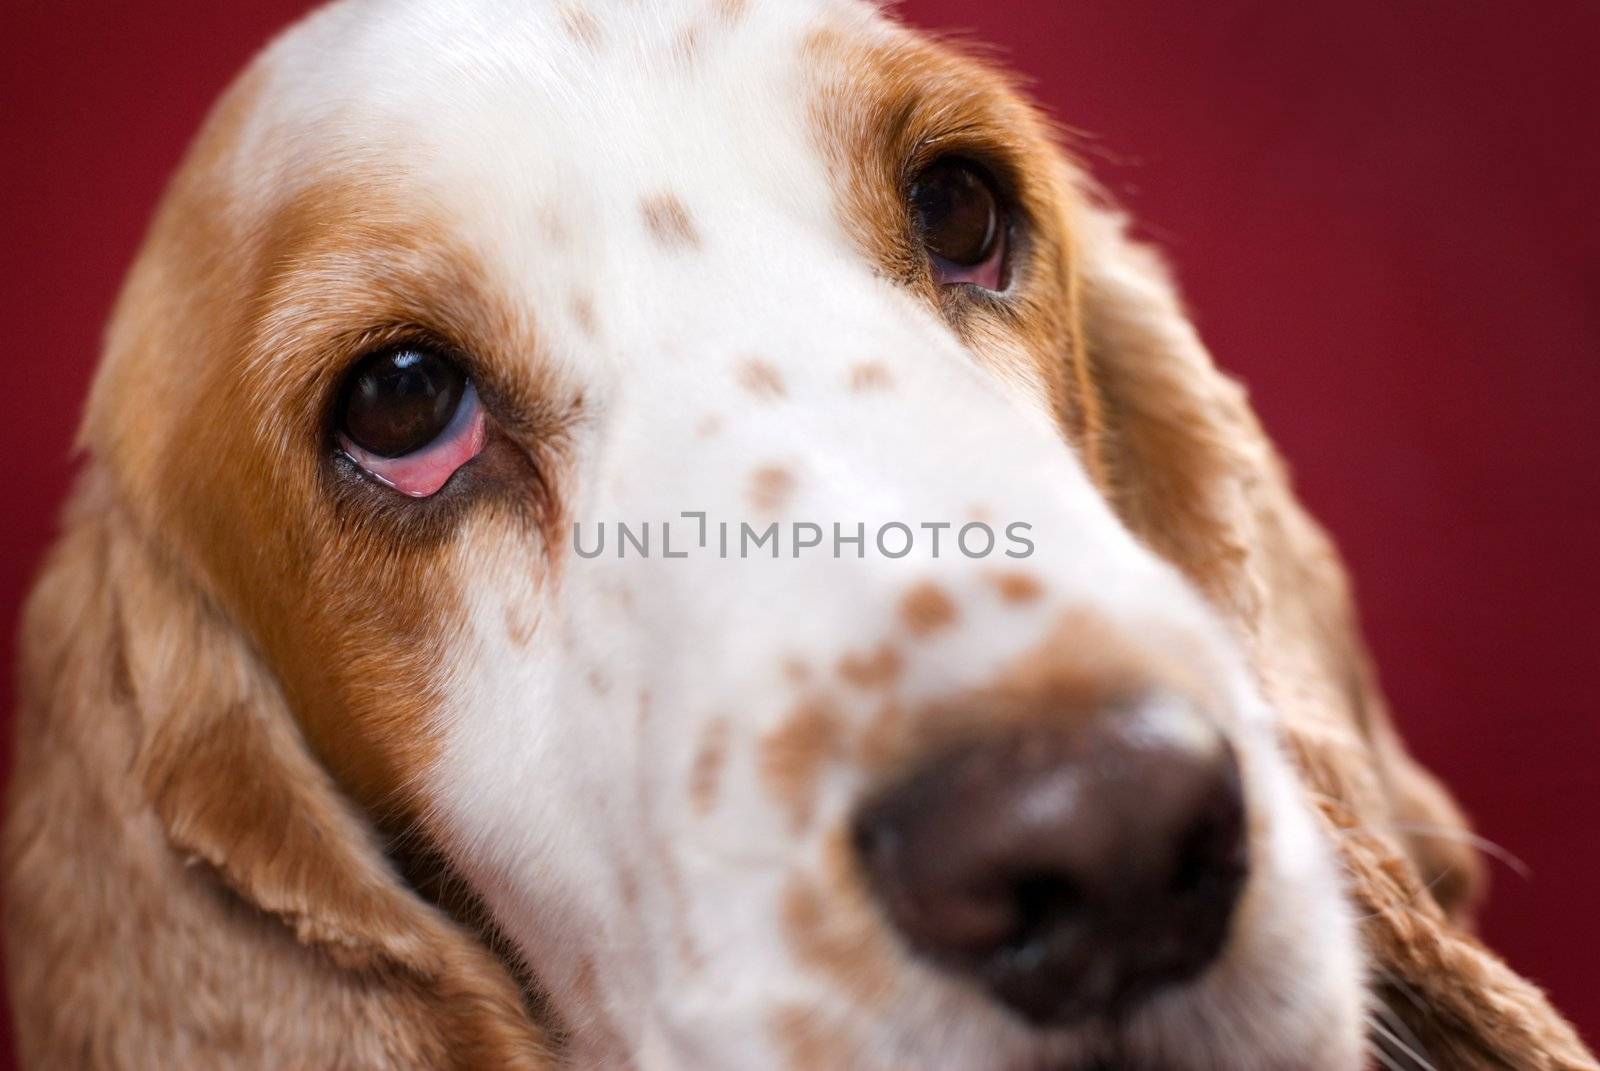 Close up of Cocker Spaniel's head. Selective focus on the bloodshot eye.